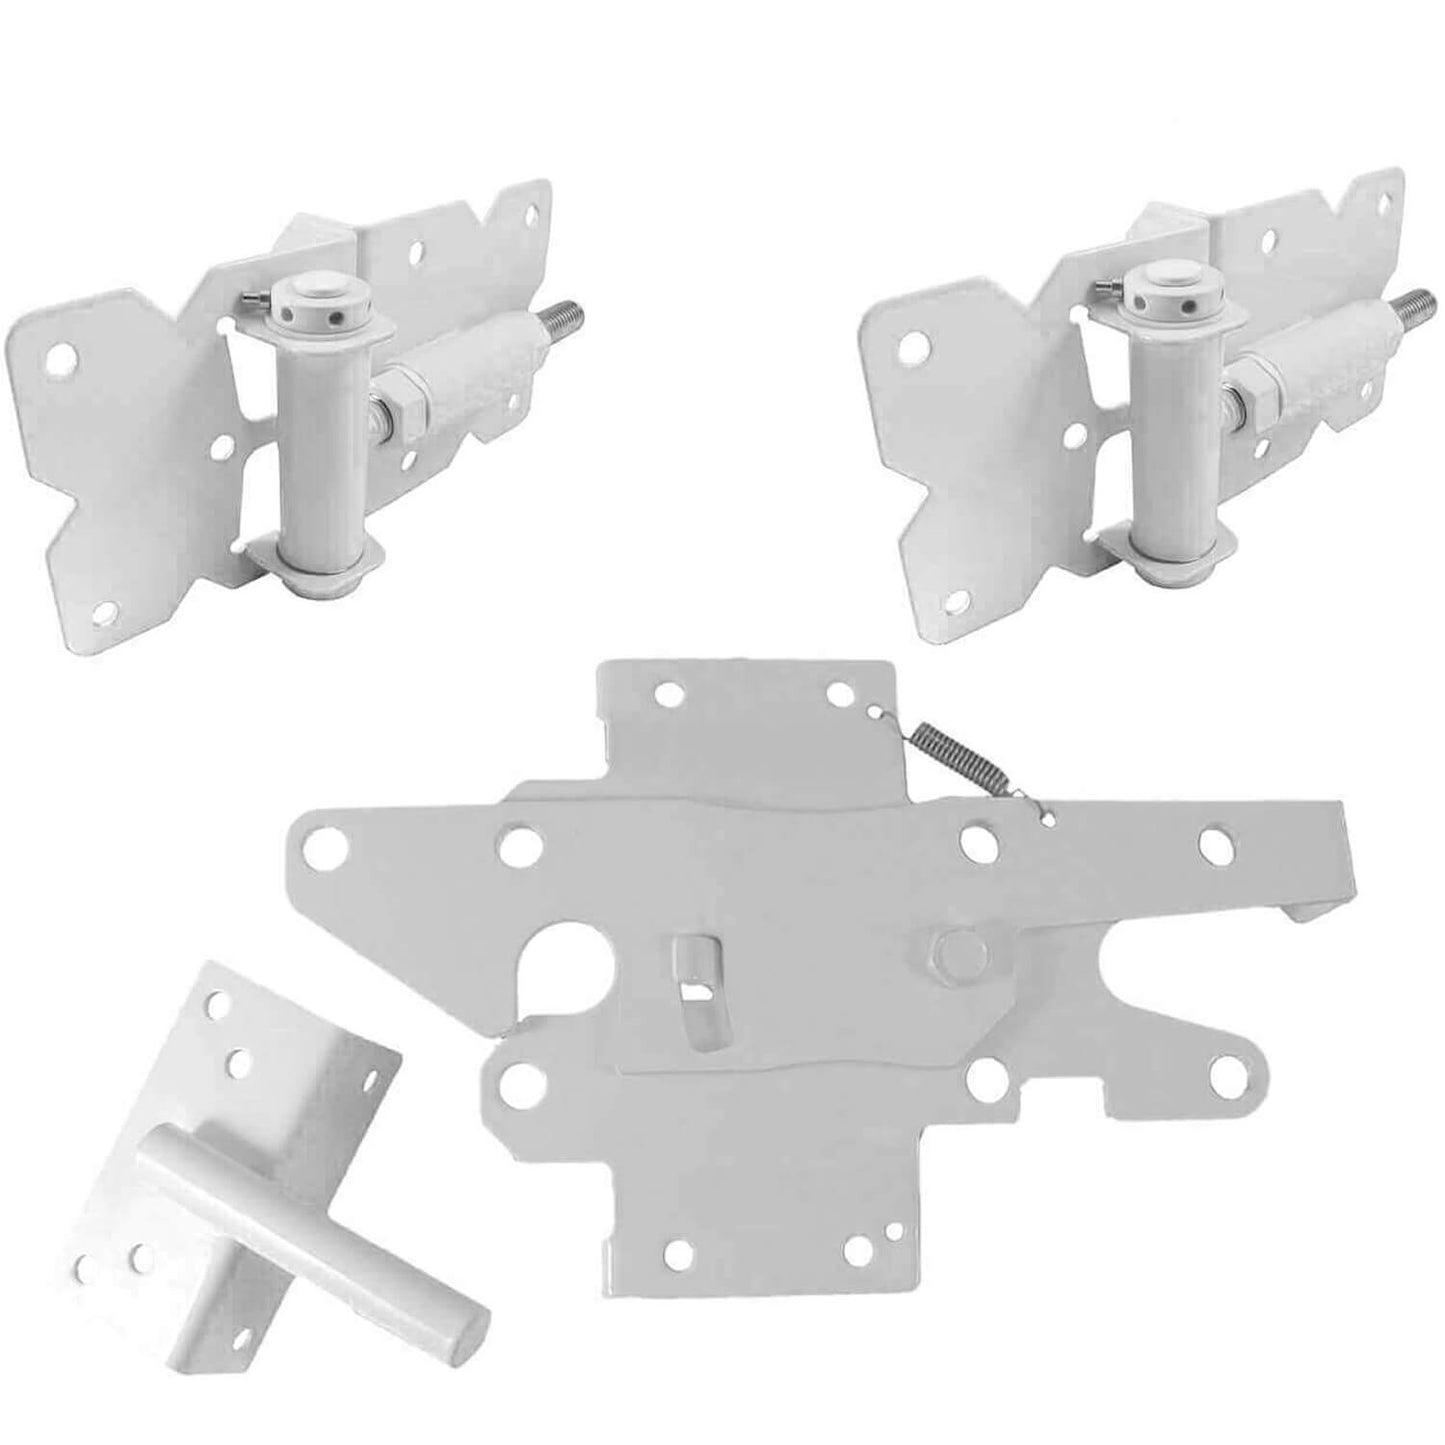 Vinyl Gate Kits in Standard and Self-Closing for Single and Double Gates. Choose from Black or White With or Without Drop Rods. Standard and Extended Gate Latches